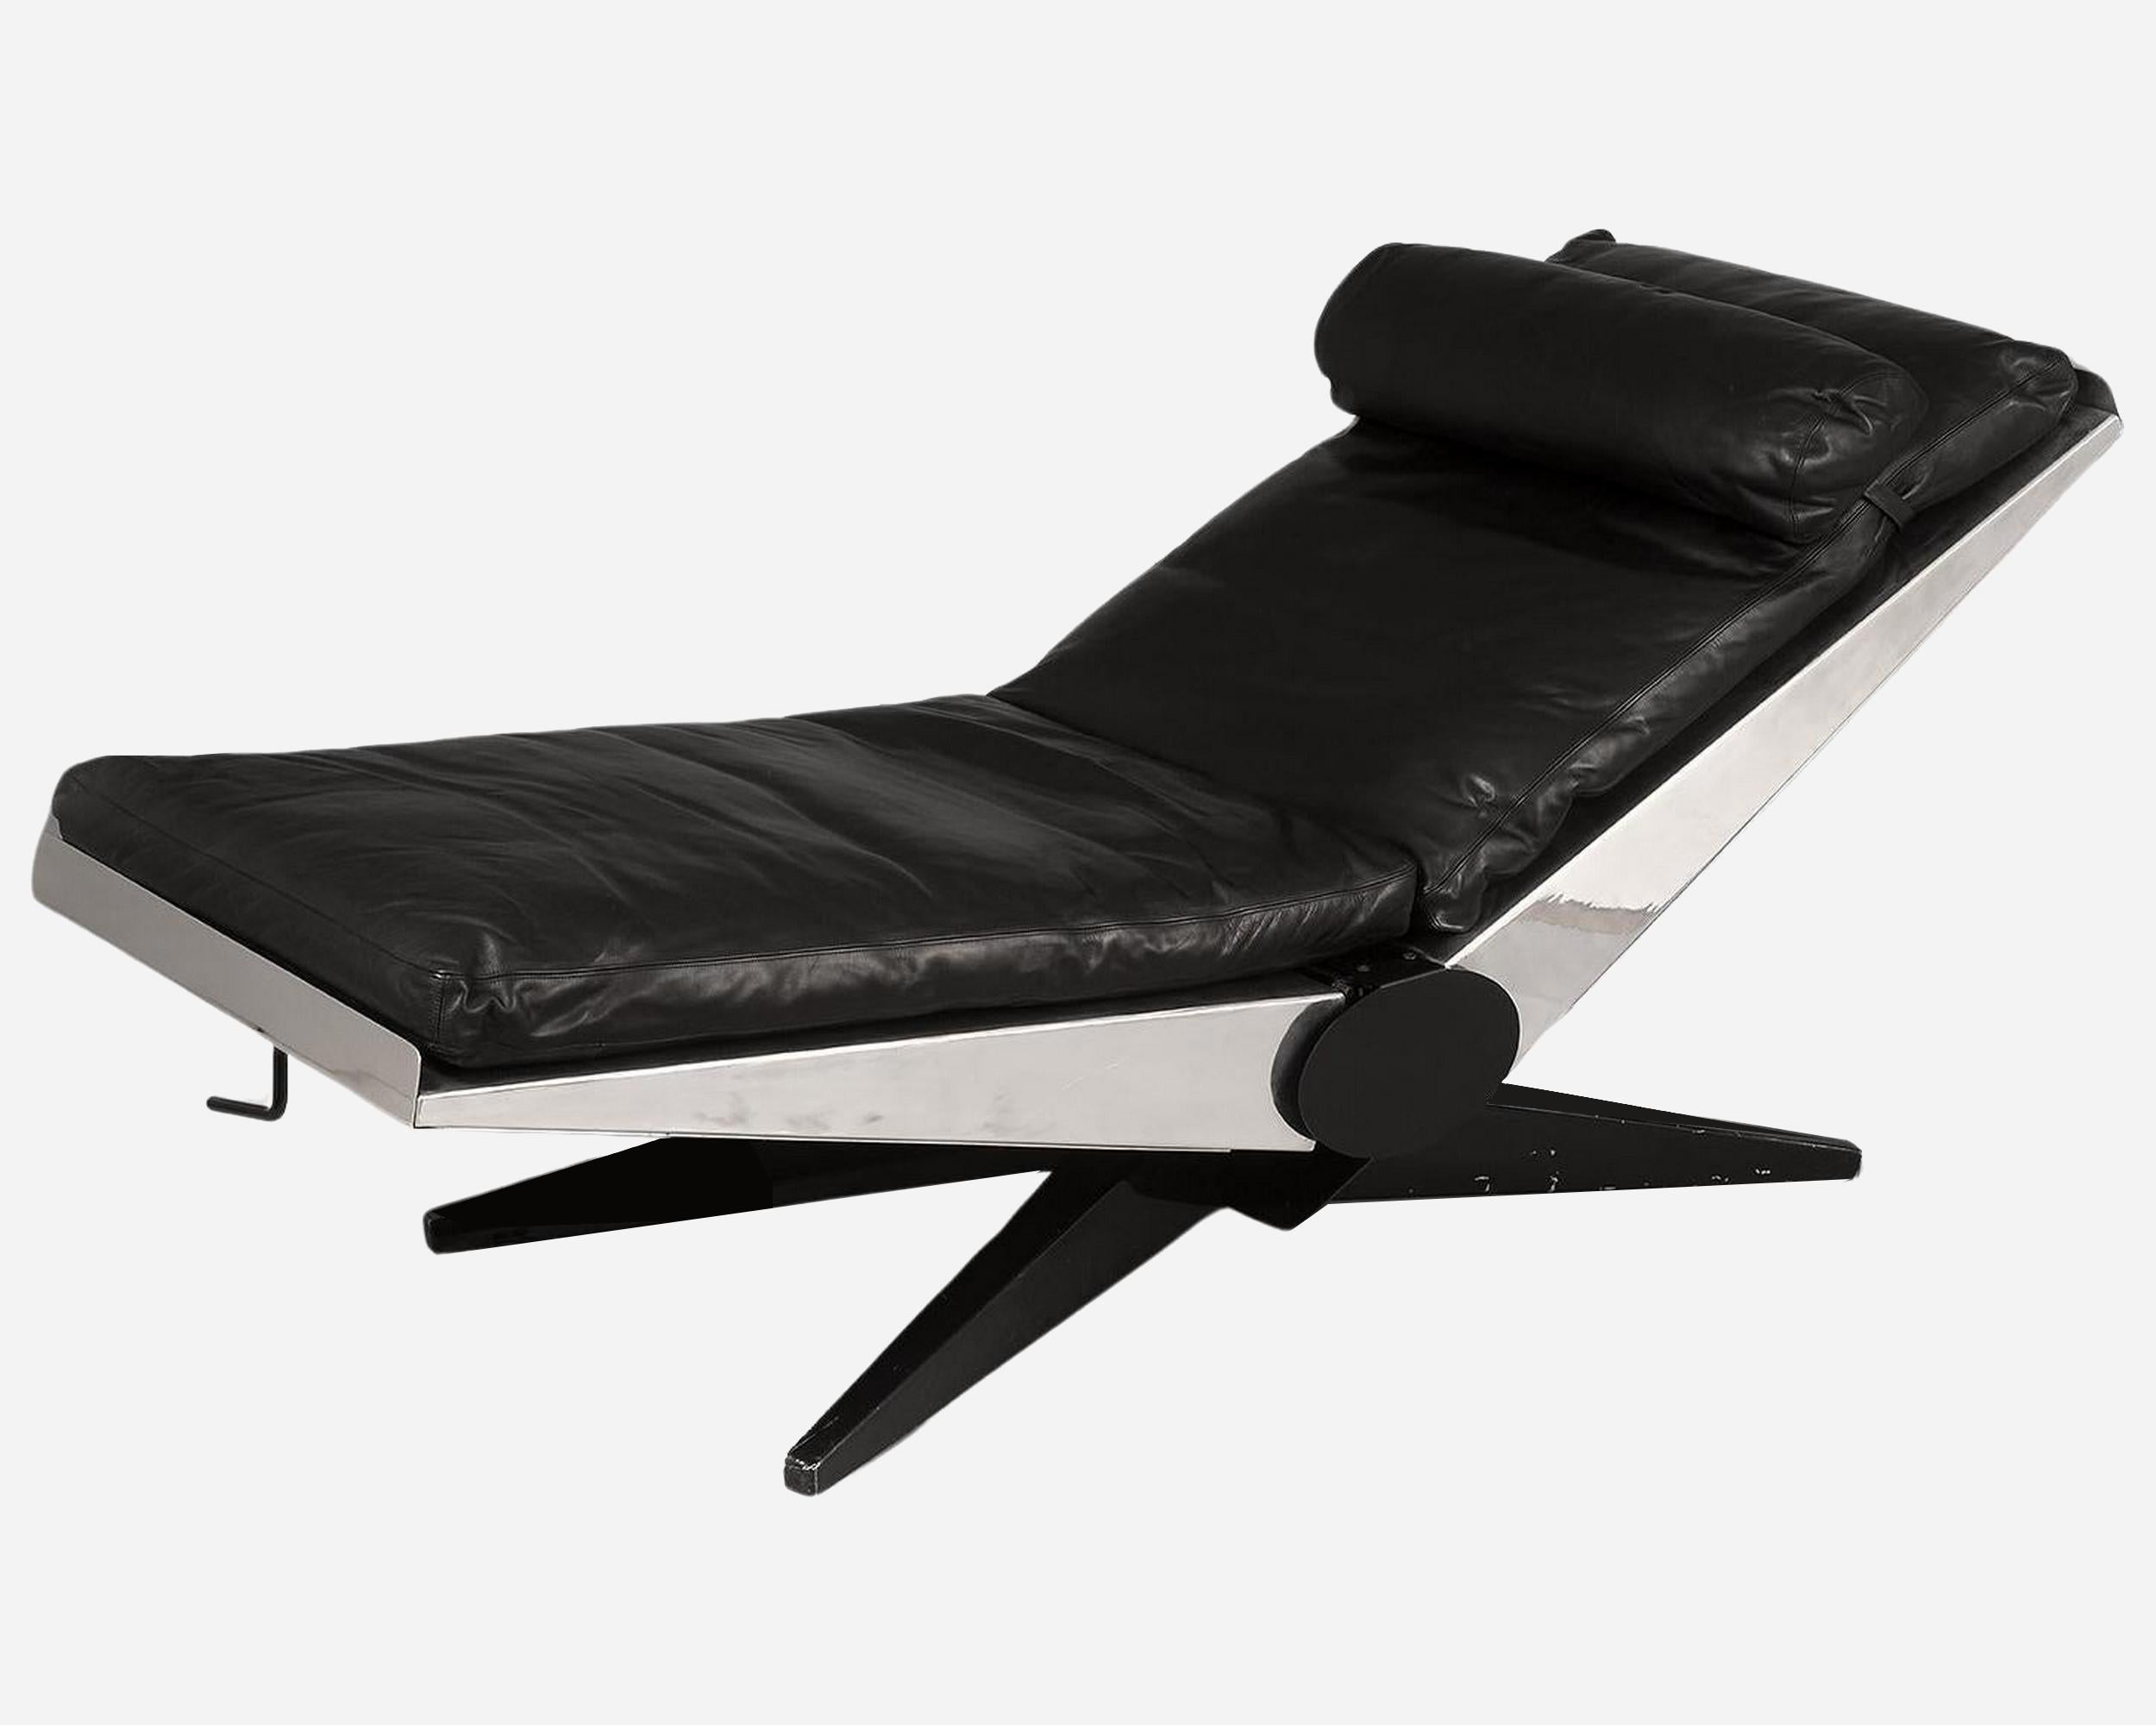 Rare chaise longue with a rack-and-pinion mechanism for folding or extending the chair.
Made of polished aluminum and black-lacquered iron. The cushions and headrest are covered in black leather.
Total lenght: 182 cm (71.6 inches)
